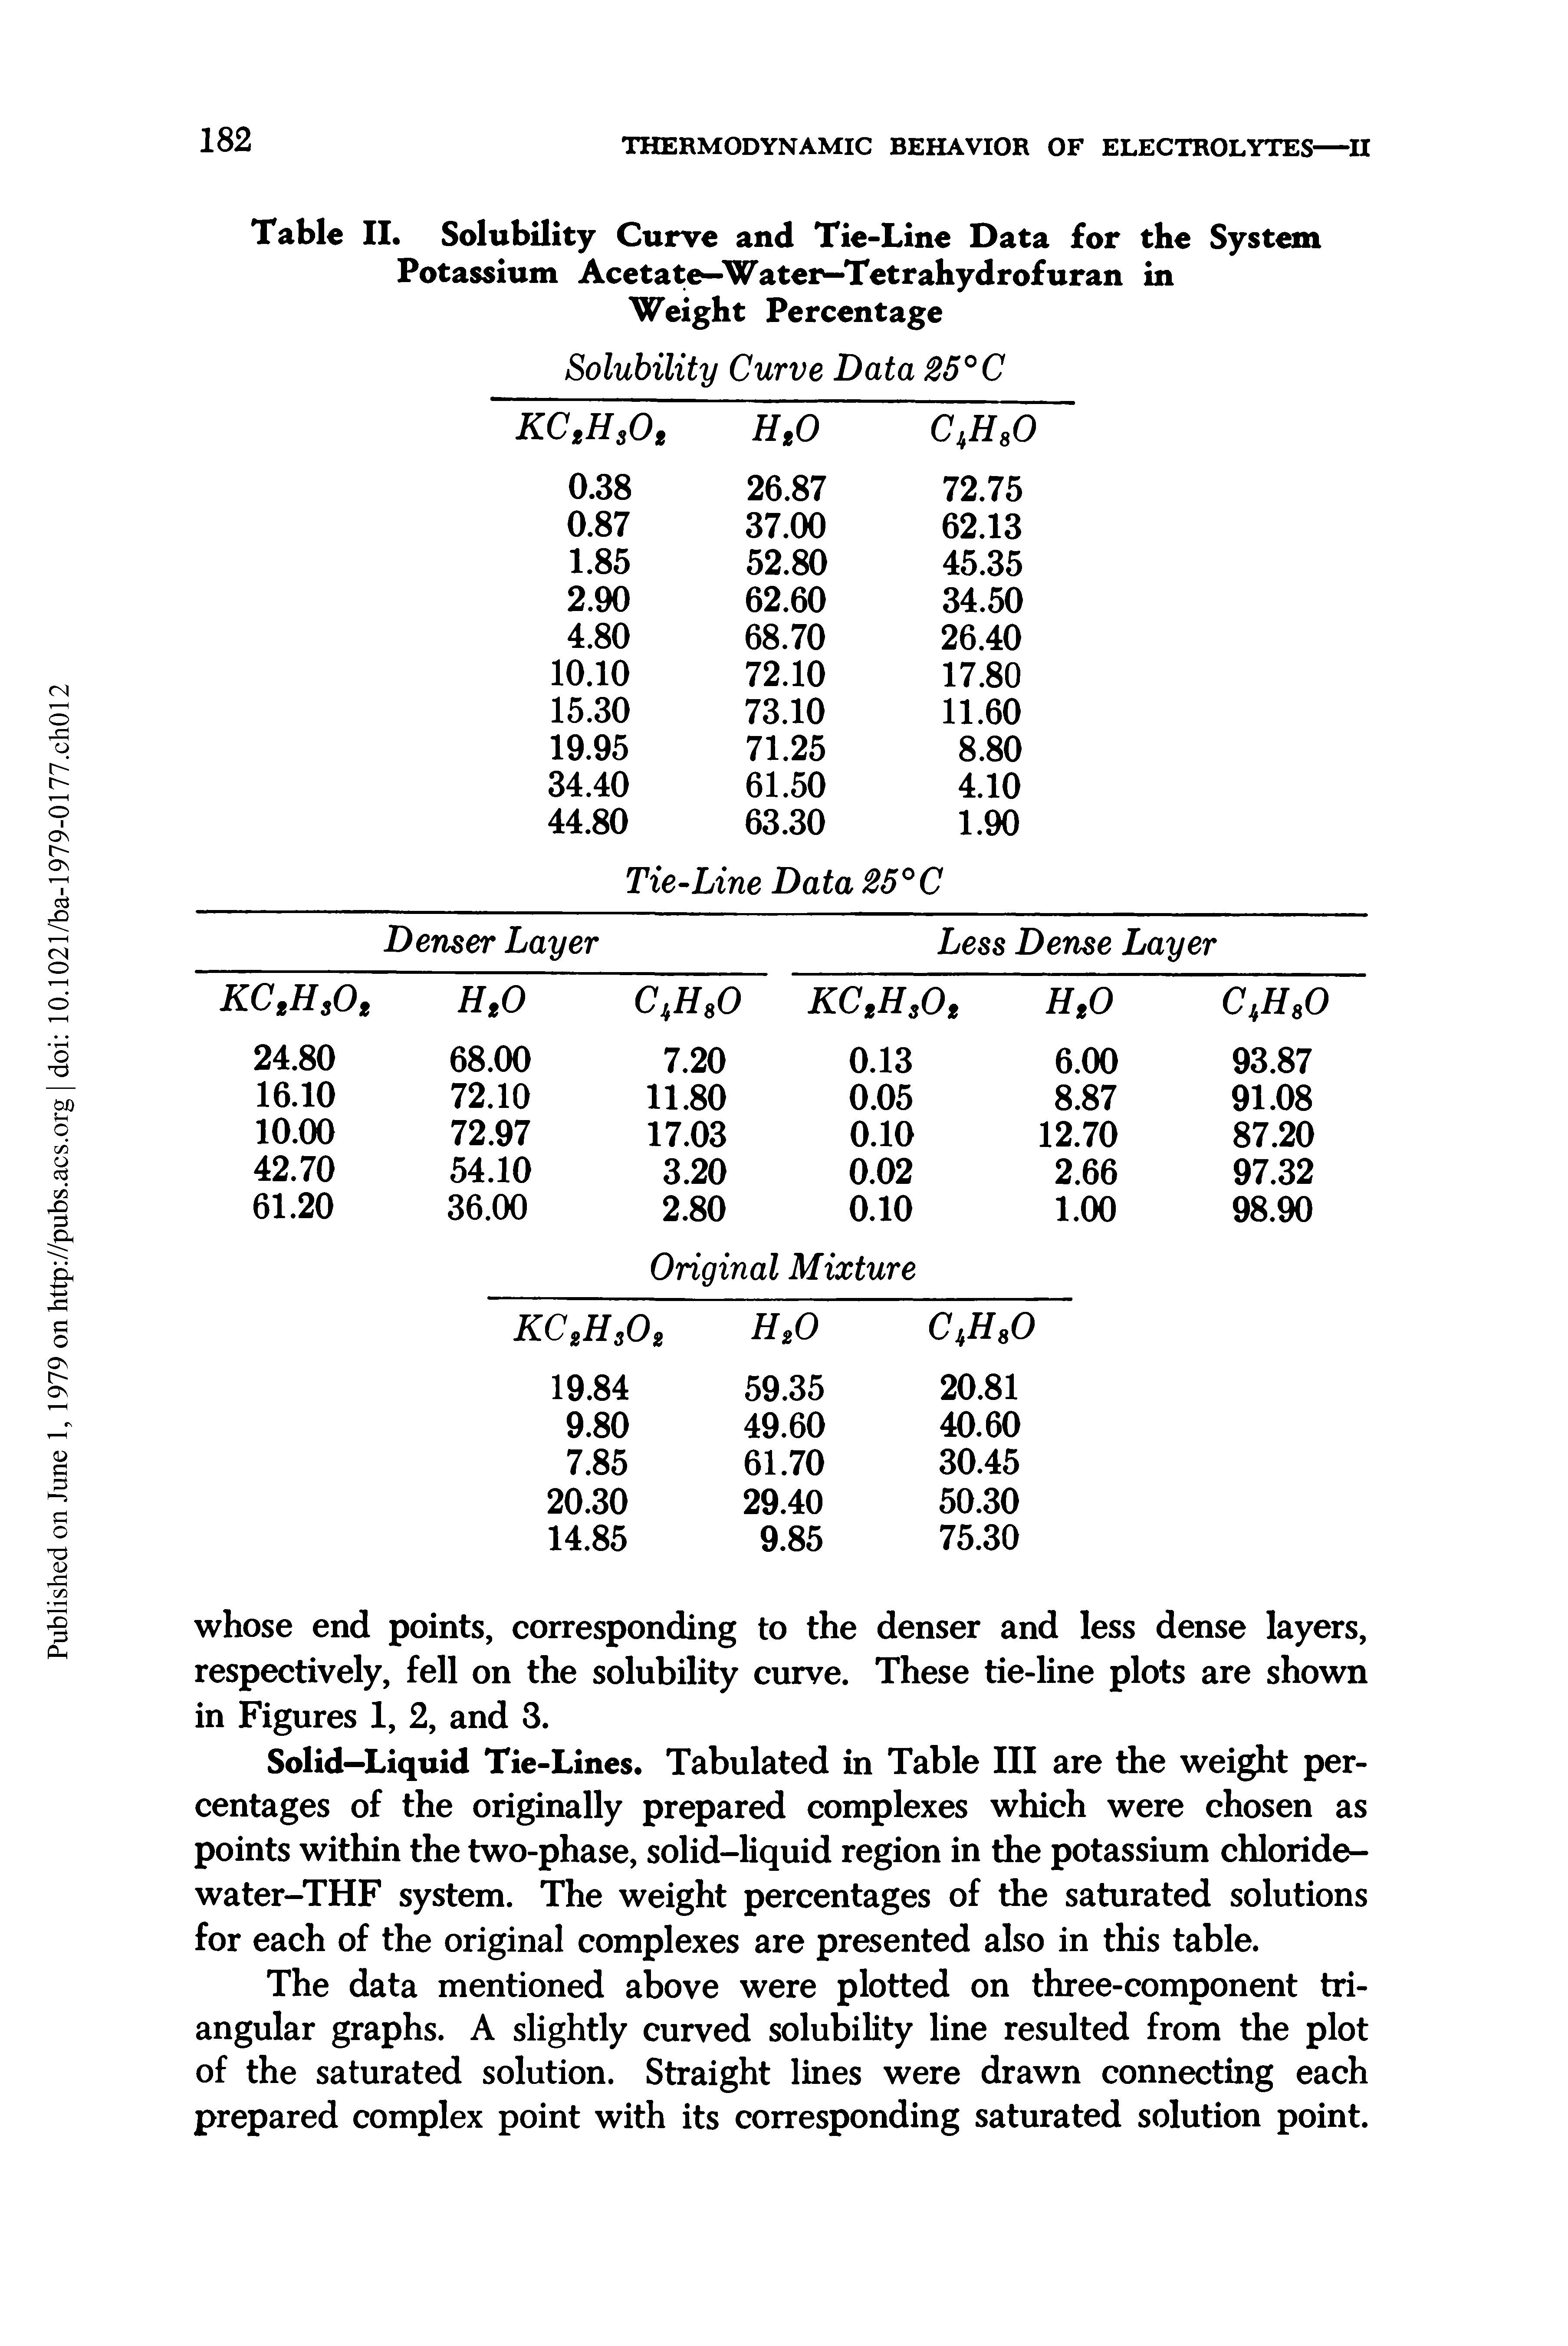 Table II. Solubility Curve and Tie-Line Data for the System Potassium Acetate—Water-Tetrahydrofuran in Weight Percentage...